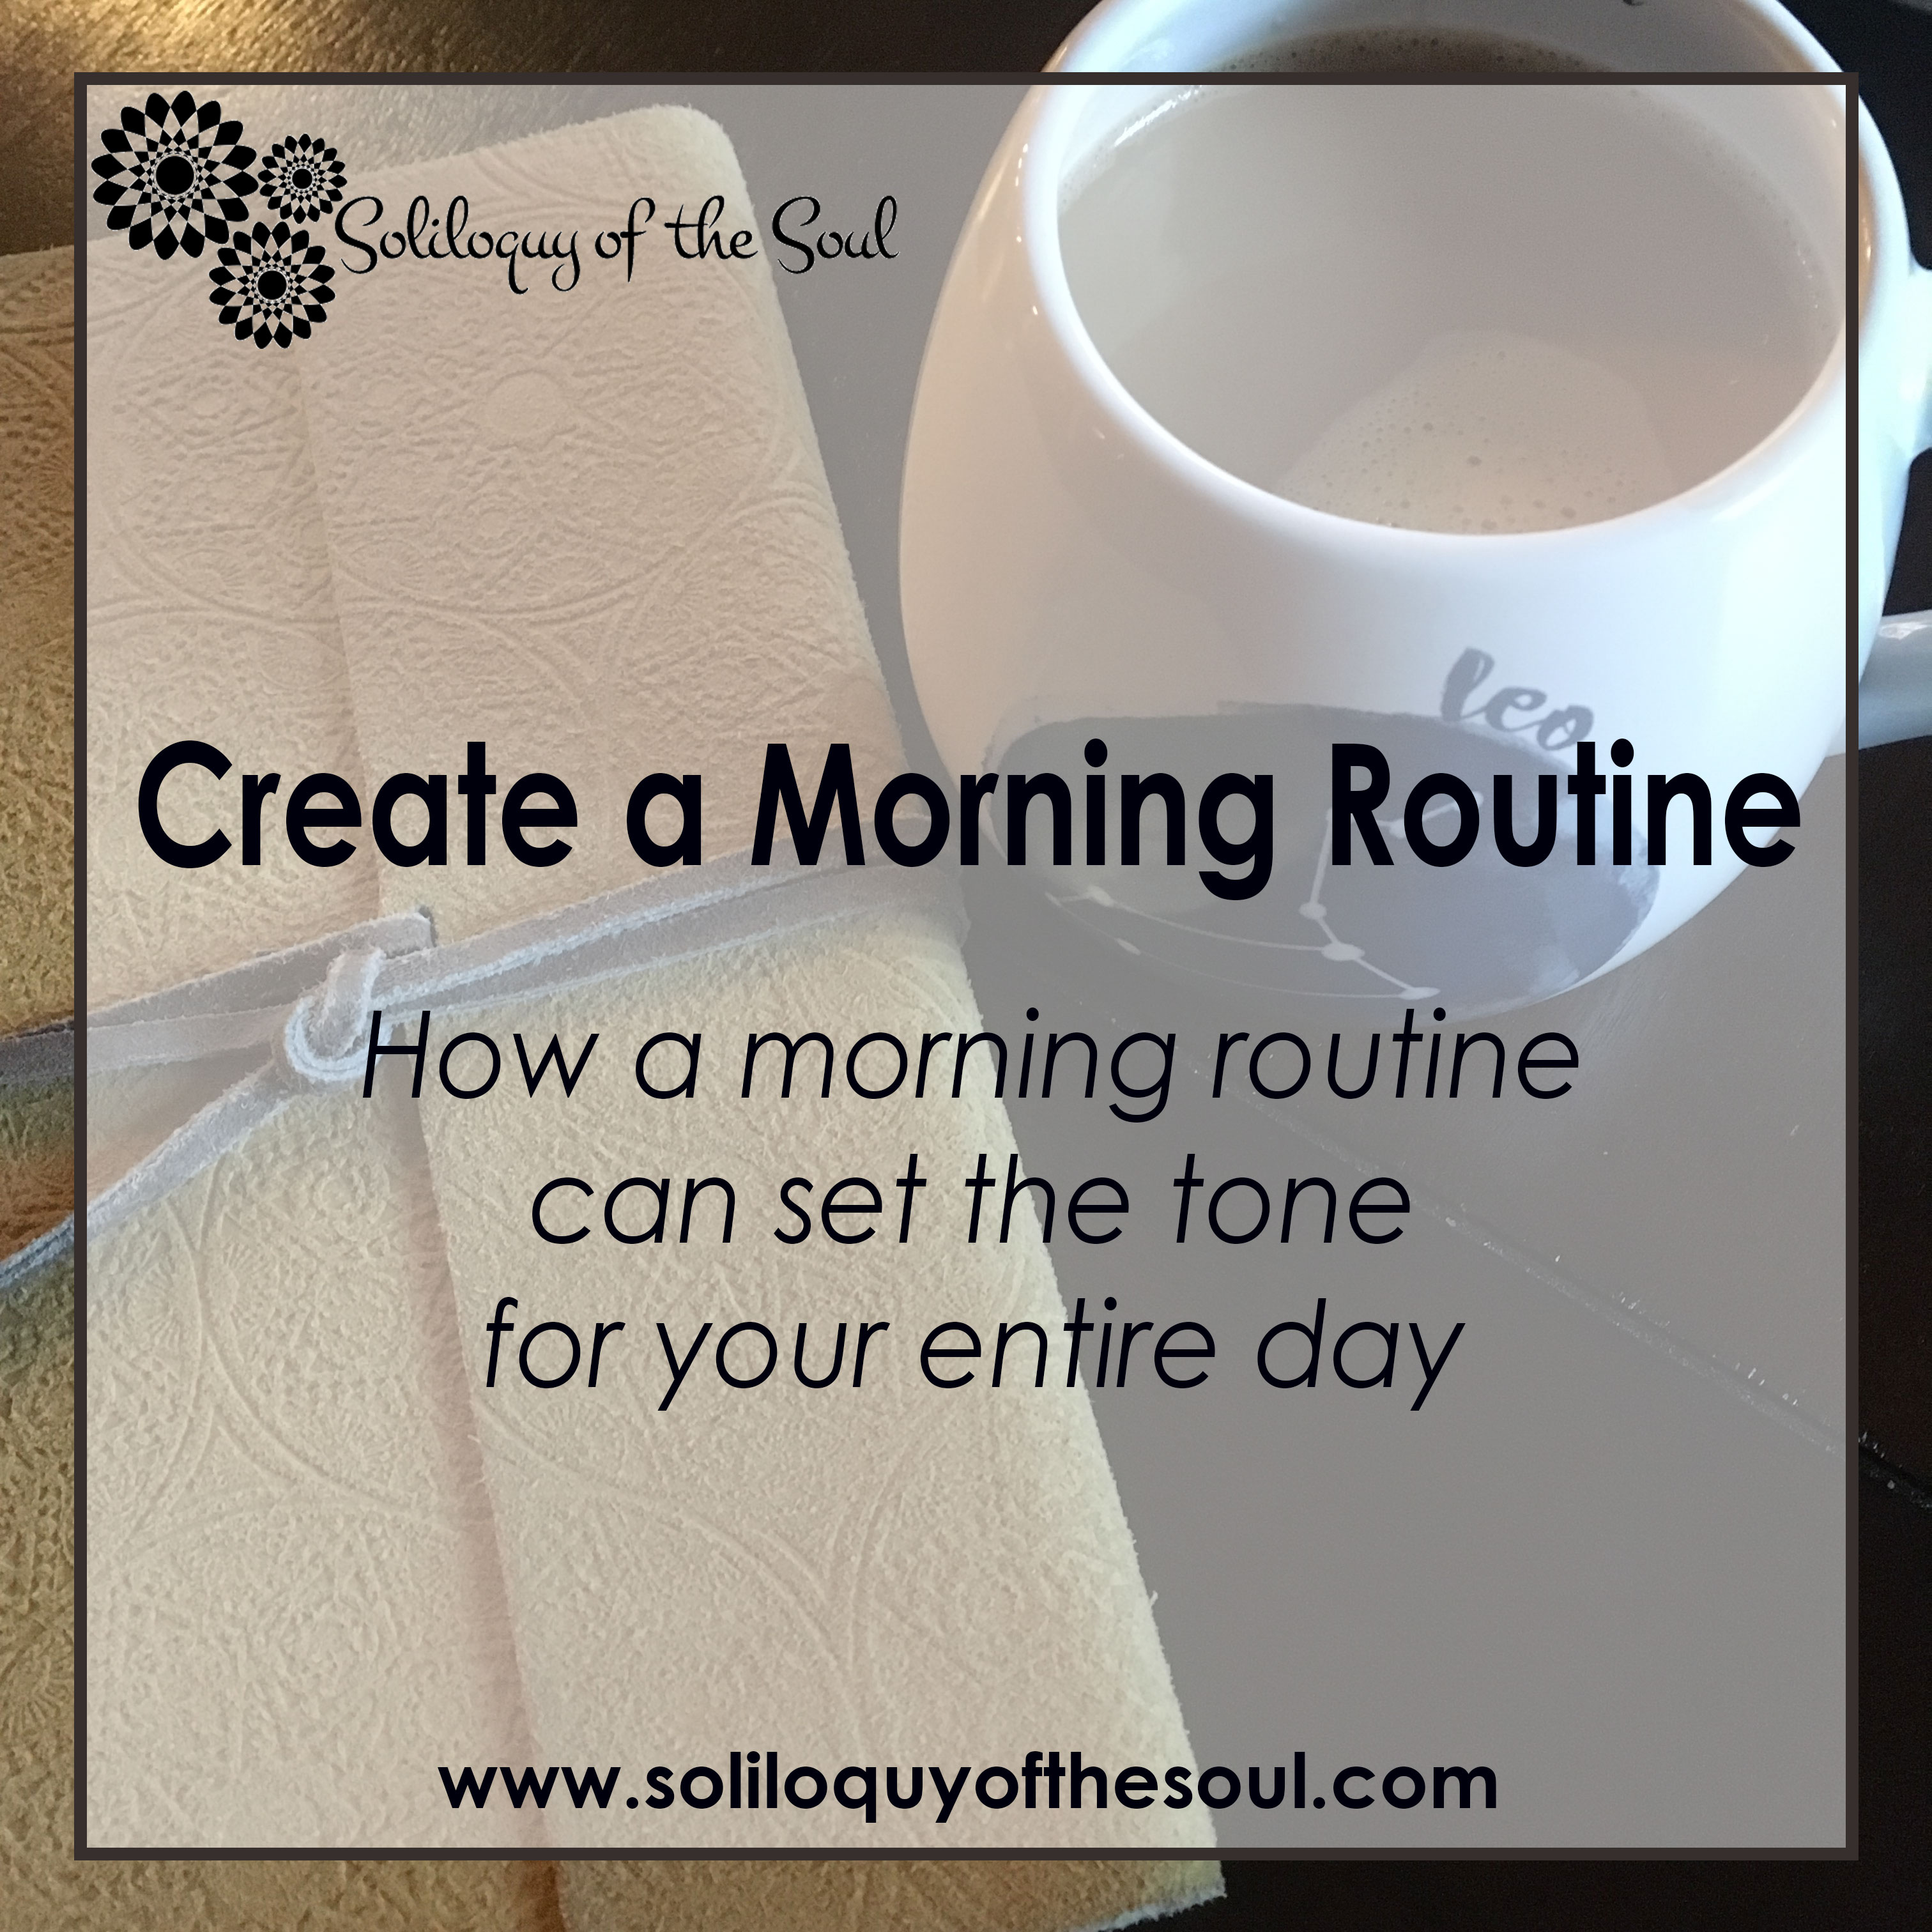 The importance of routine